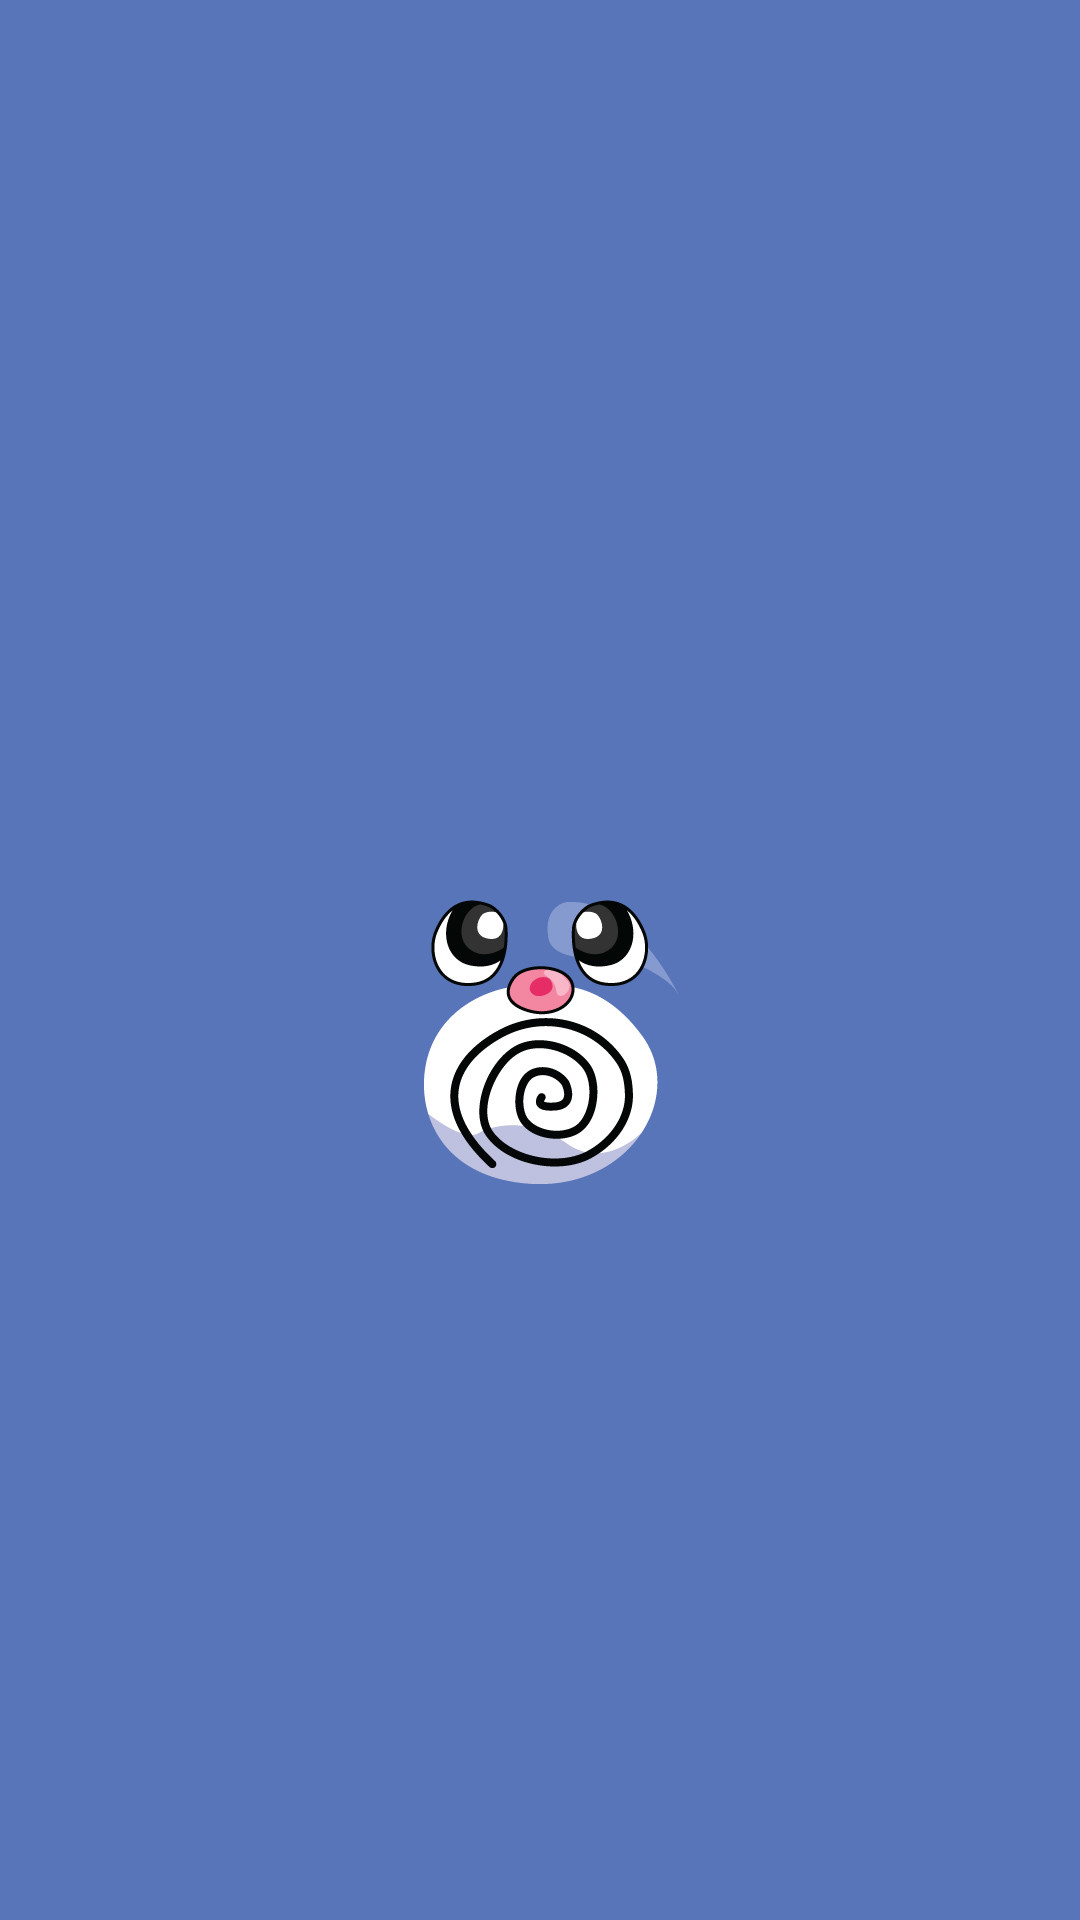 1080x1920 Poliwag Pokemon iPhone 6+ HD Wallpaper - http://freebestpicture.com/